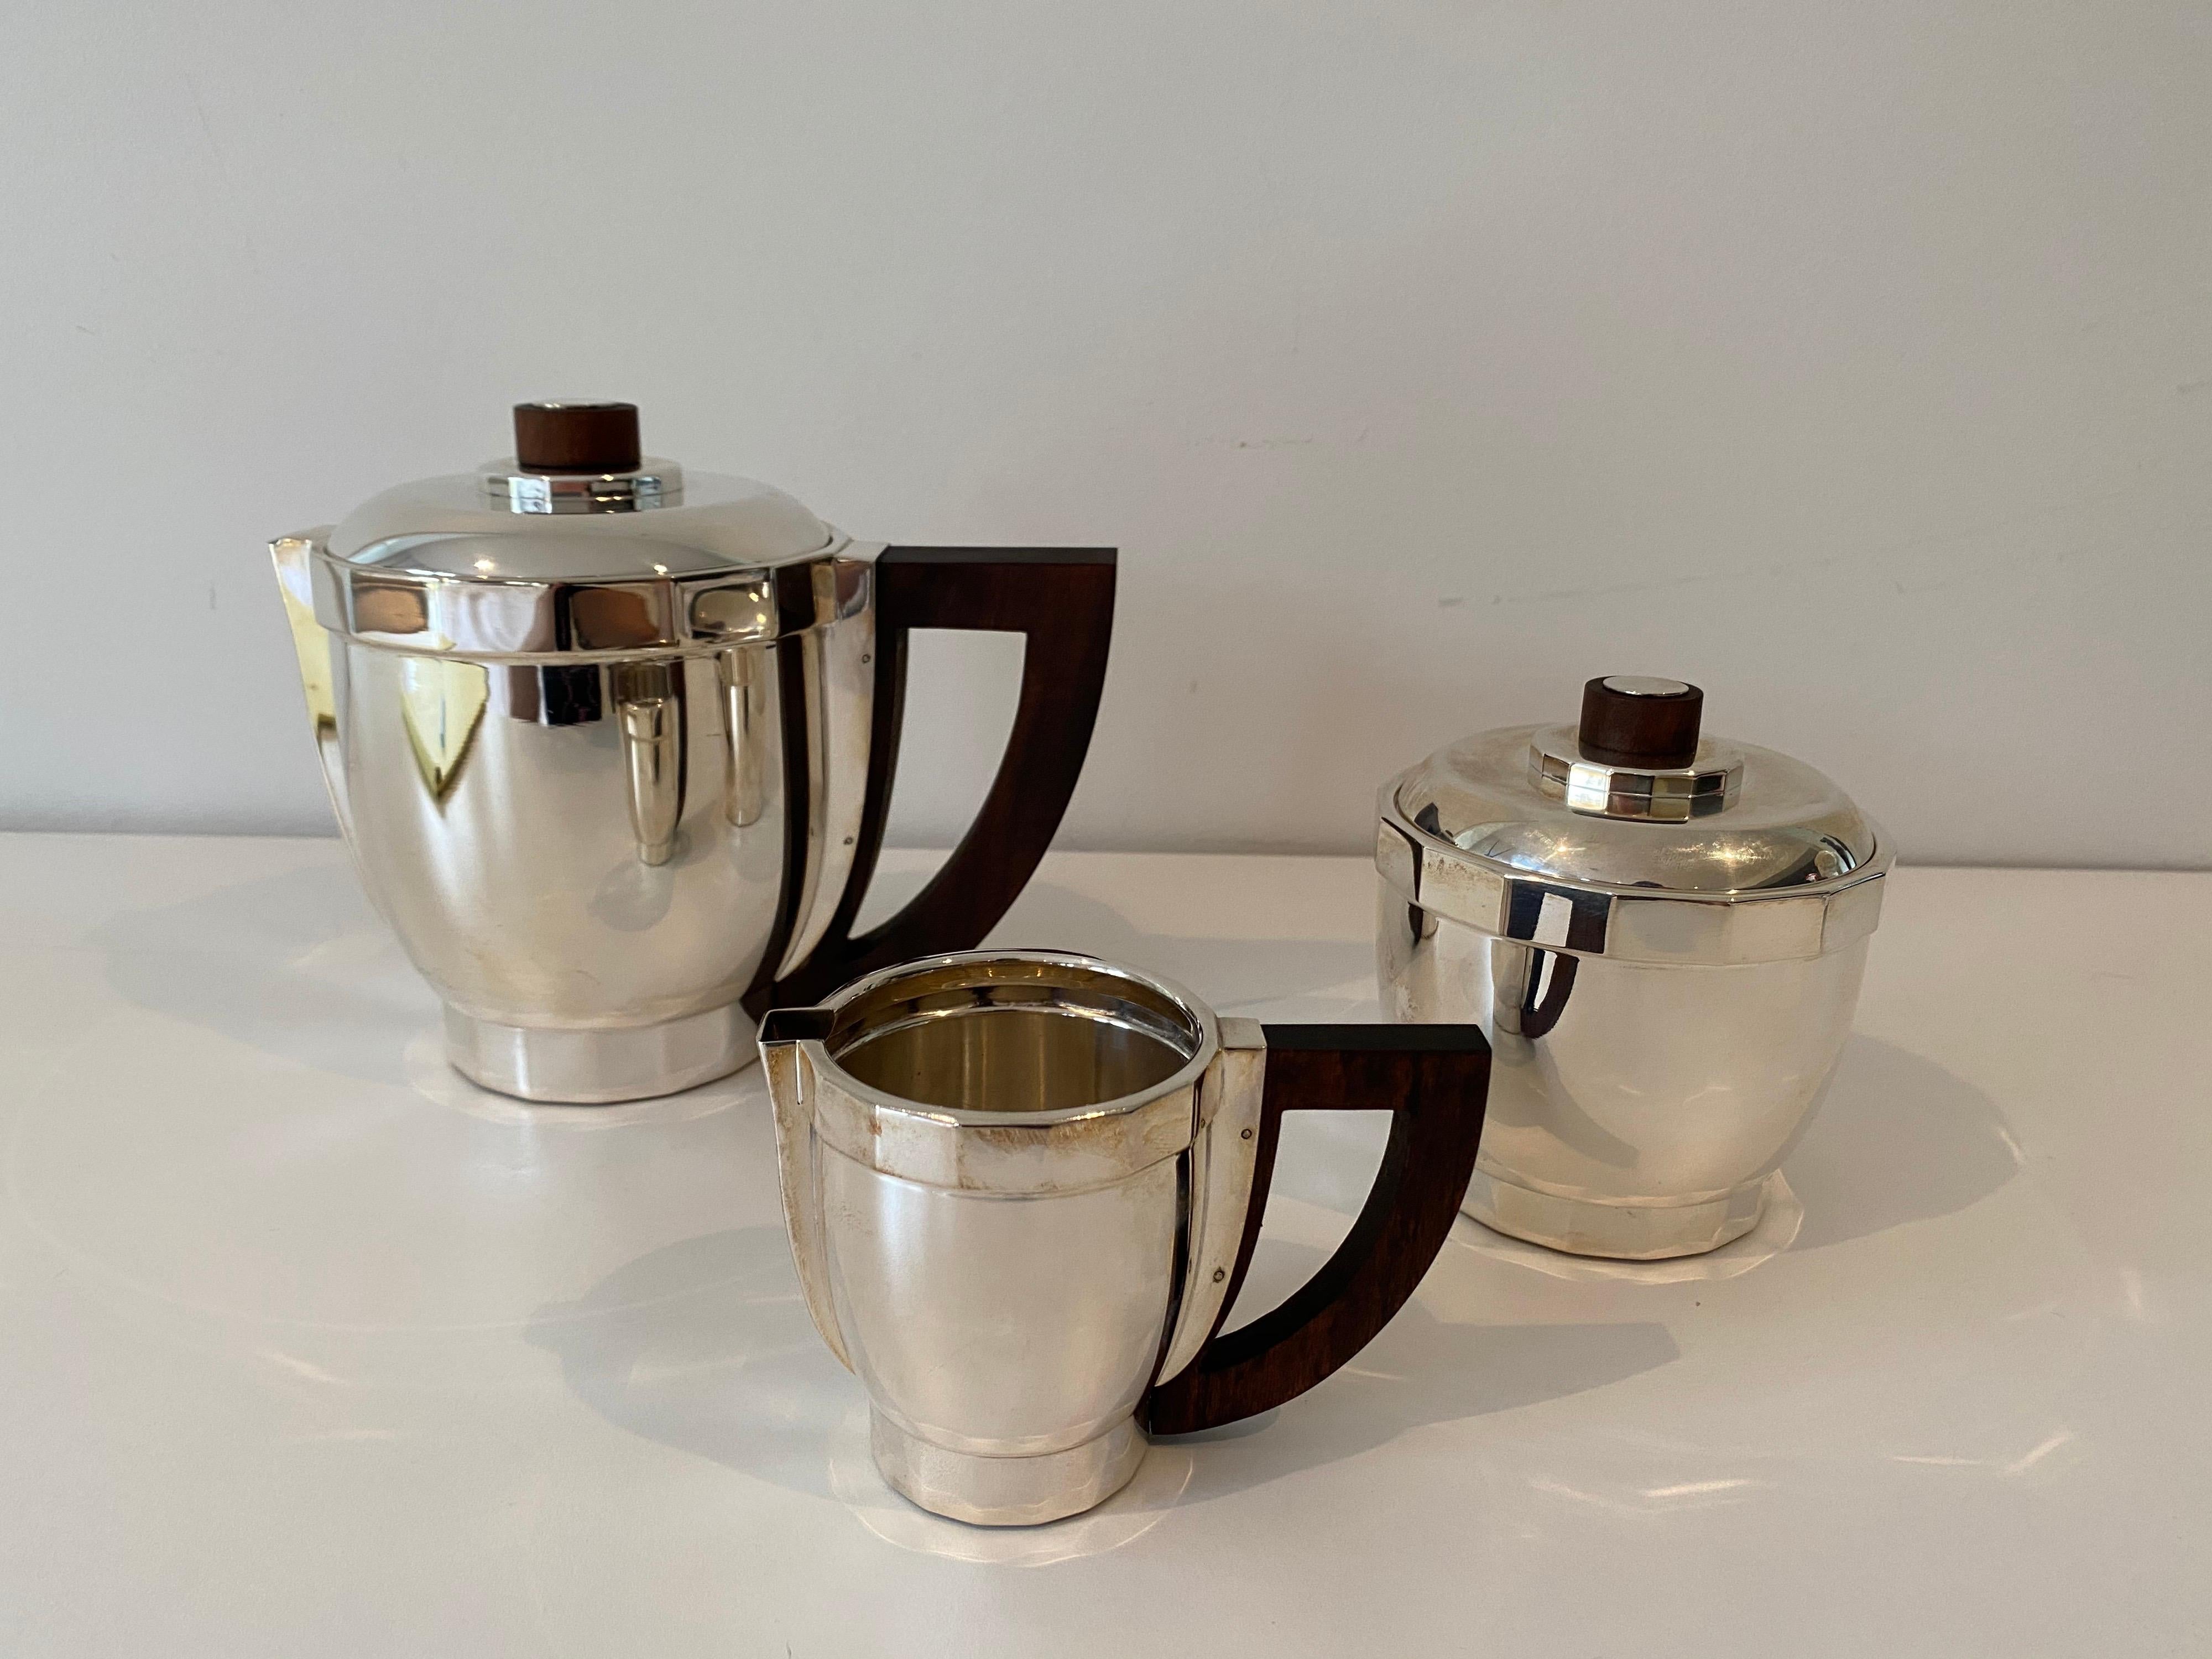 Early 20th century Puiforcat silverplate coffee set with rosewood handles from the Art Deco Collection, designed 1927. The set includes coffee pot 6.25